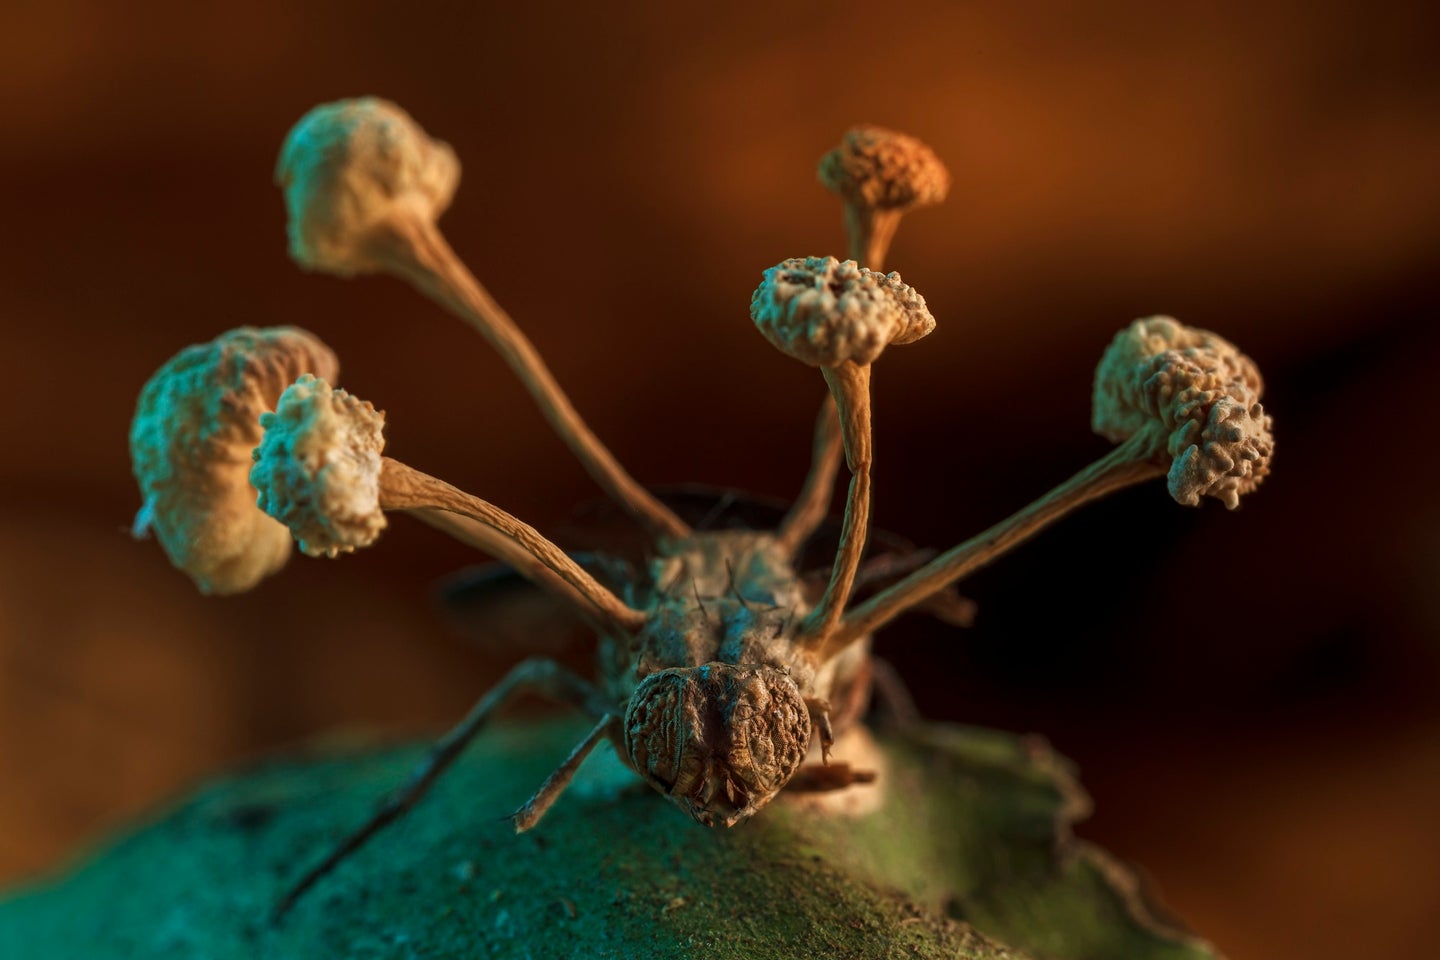 Parasitic fungi bursting from a fly's back in macro